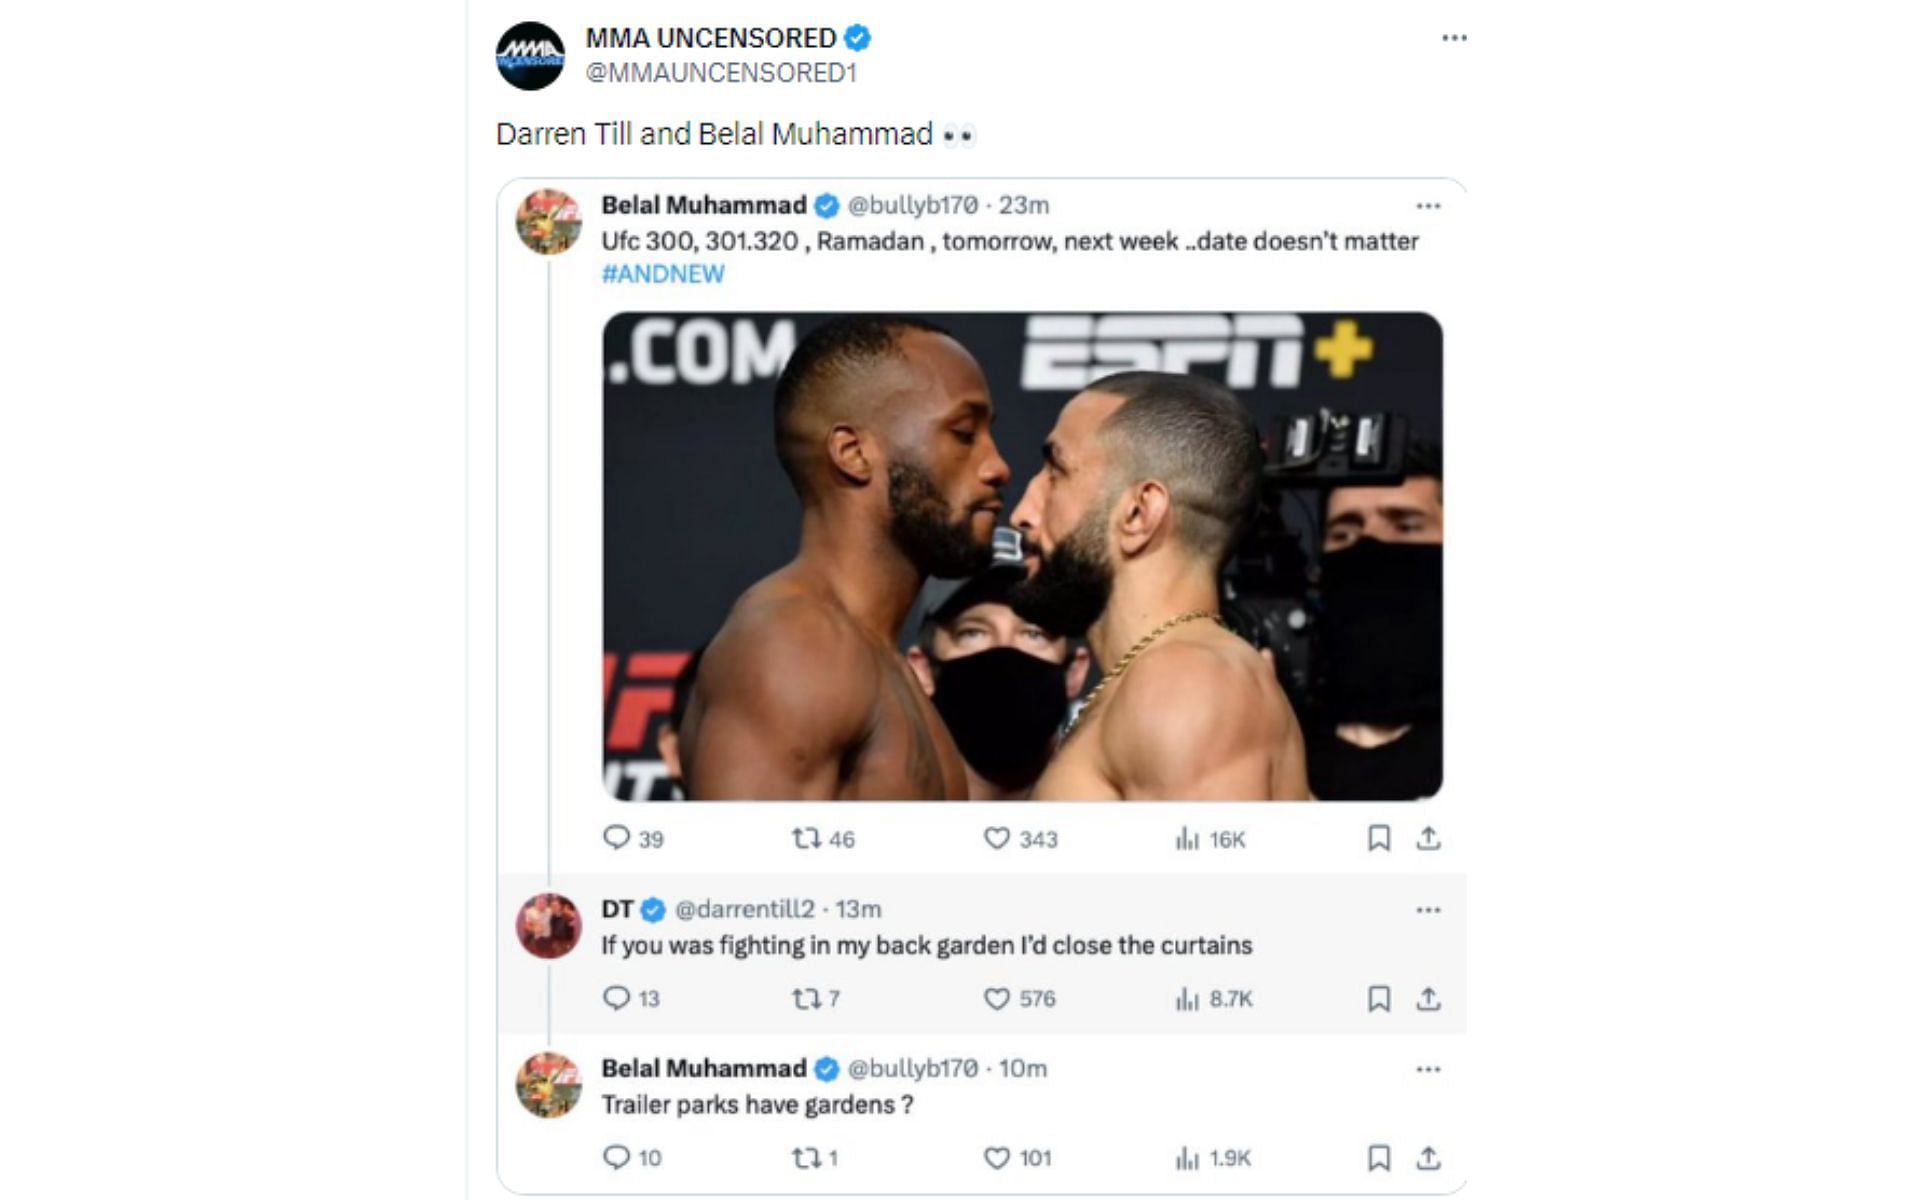 Tweets regarding Muhammad and Till&#039;s X exchange [Image courtesy: @MMAUNCENSORED1 and @bullyb170 - X]